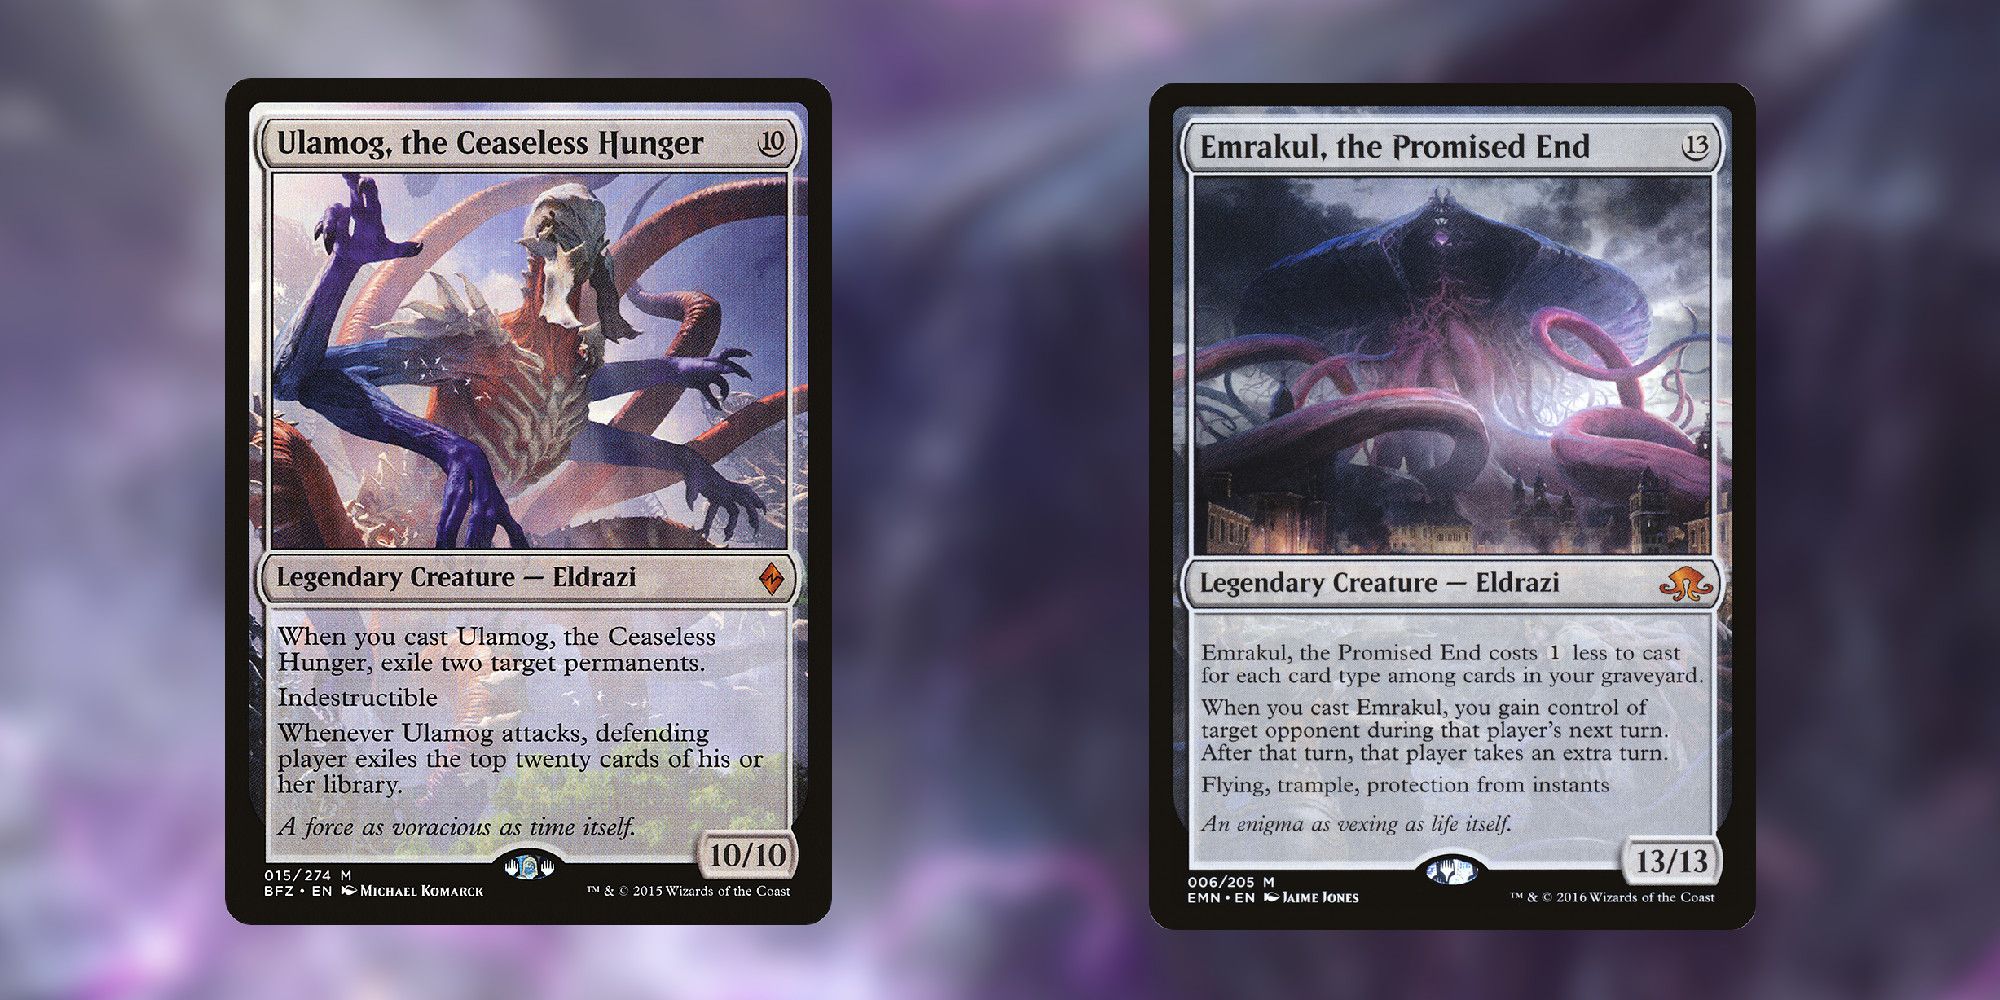 Emrakul the Promised End and Ulamog the Ceaseless Hunger